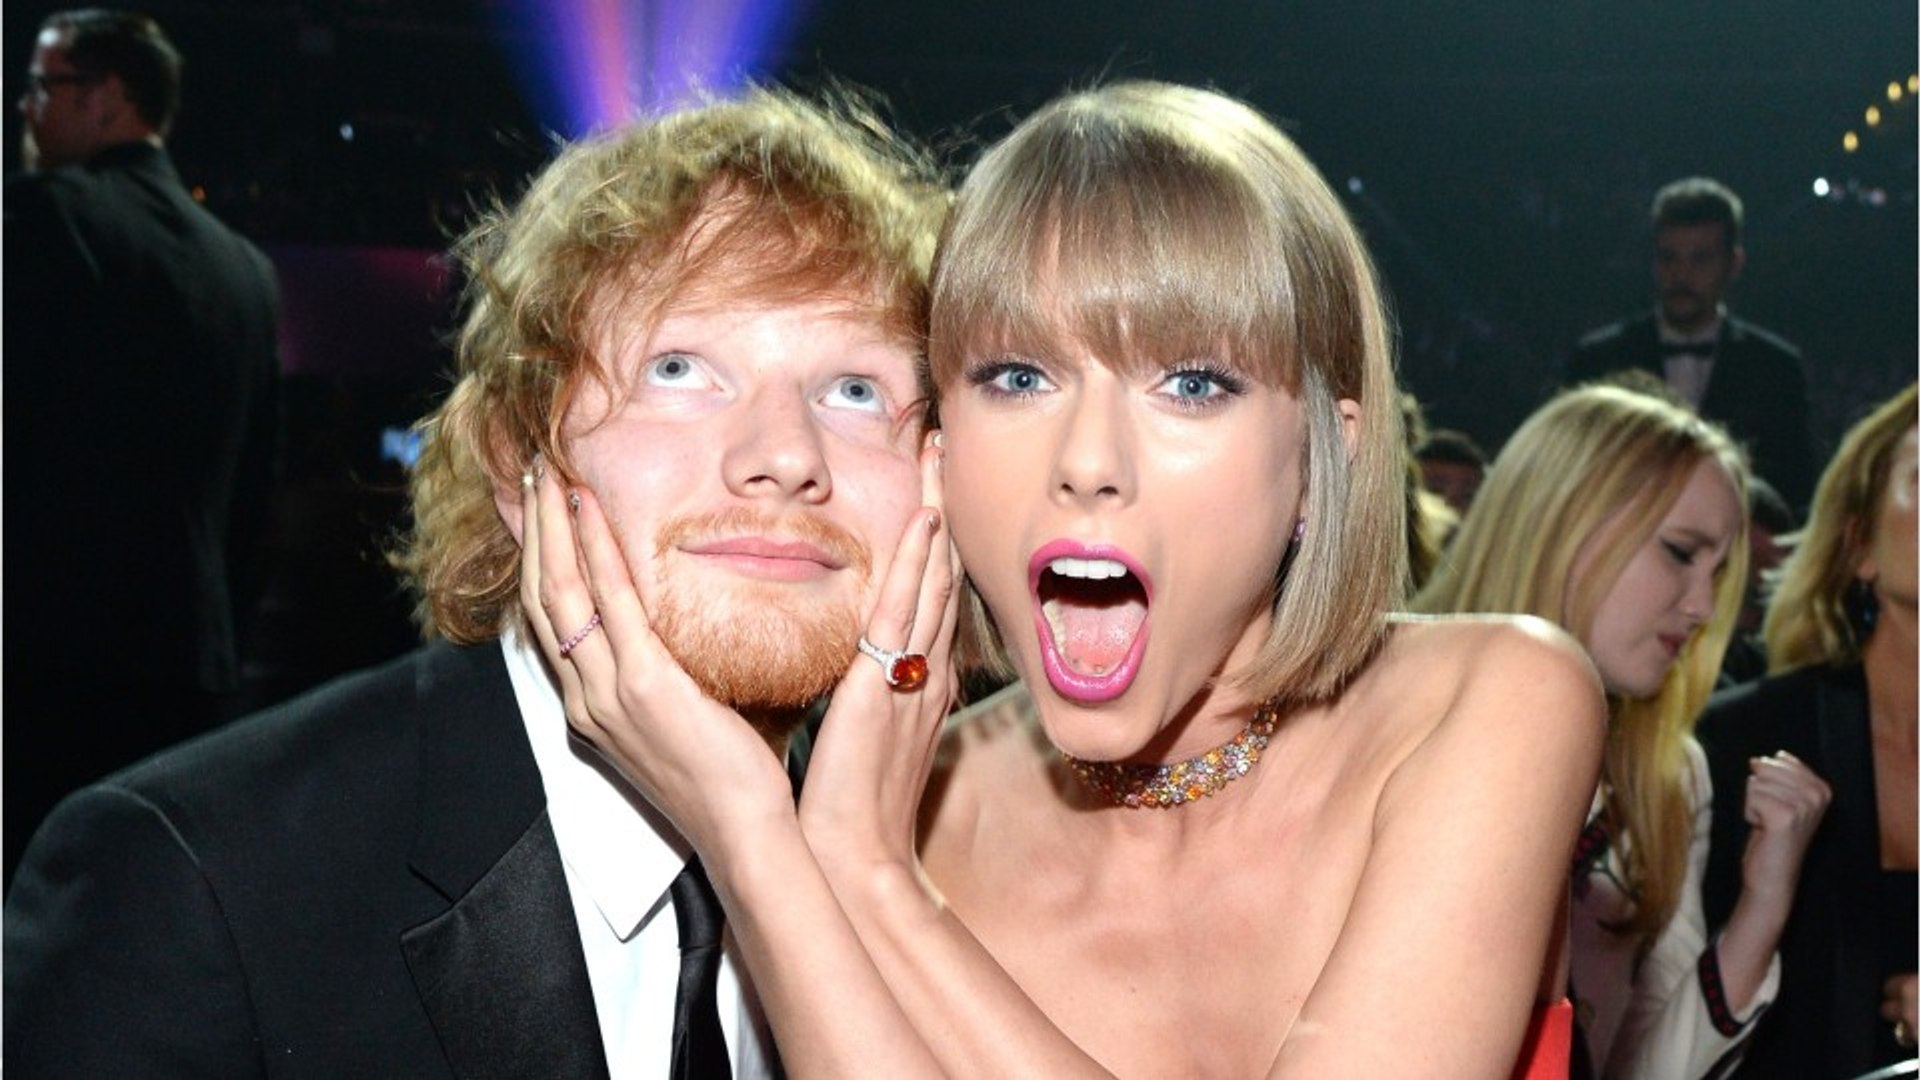 Ed Sheeran Says He And T Swift Will Write Another Song Together